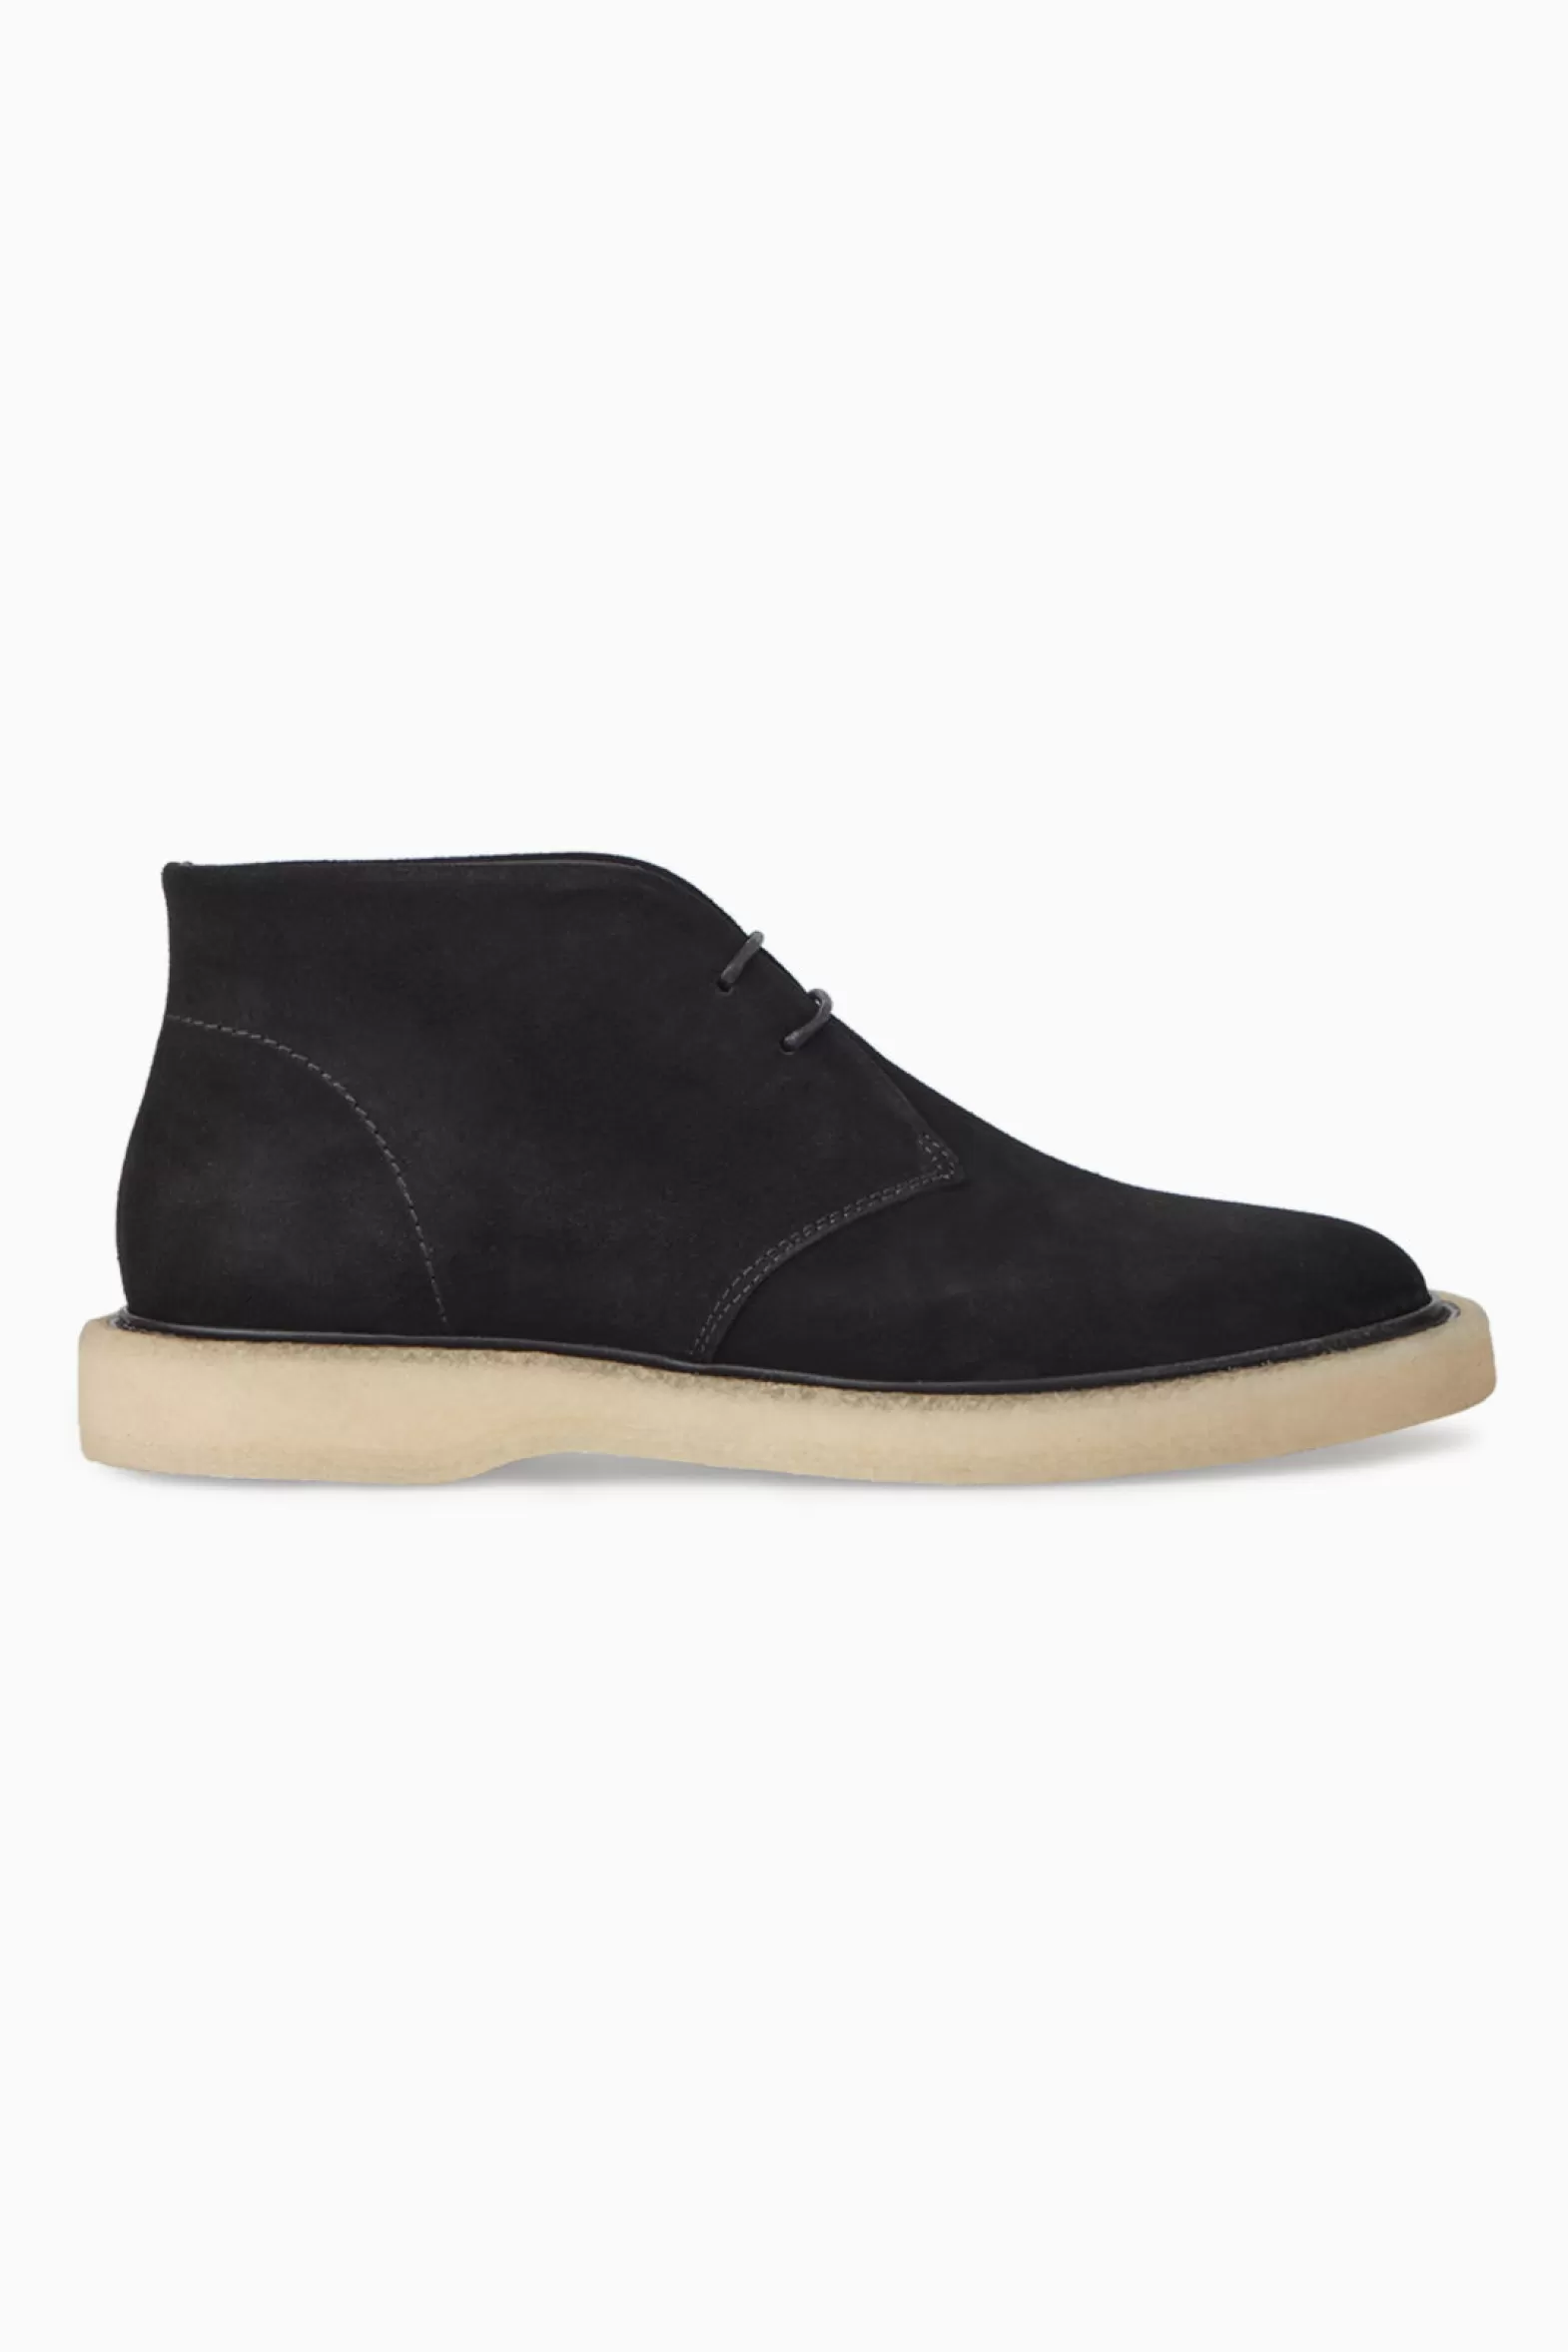 COS LEATHER DESERT BOOT